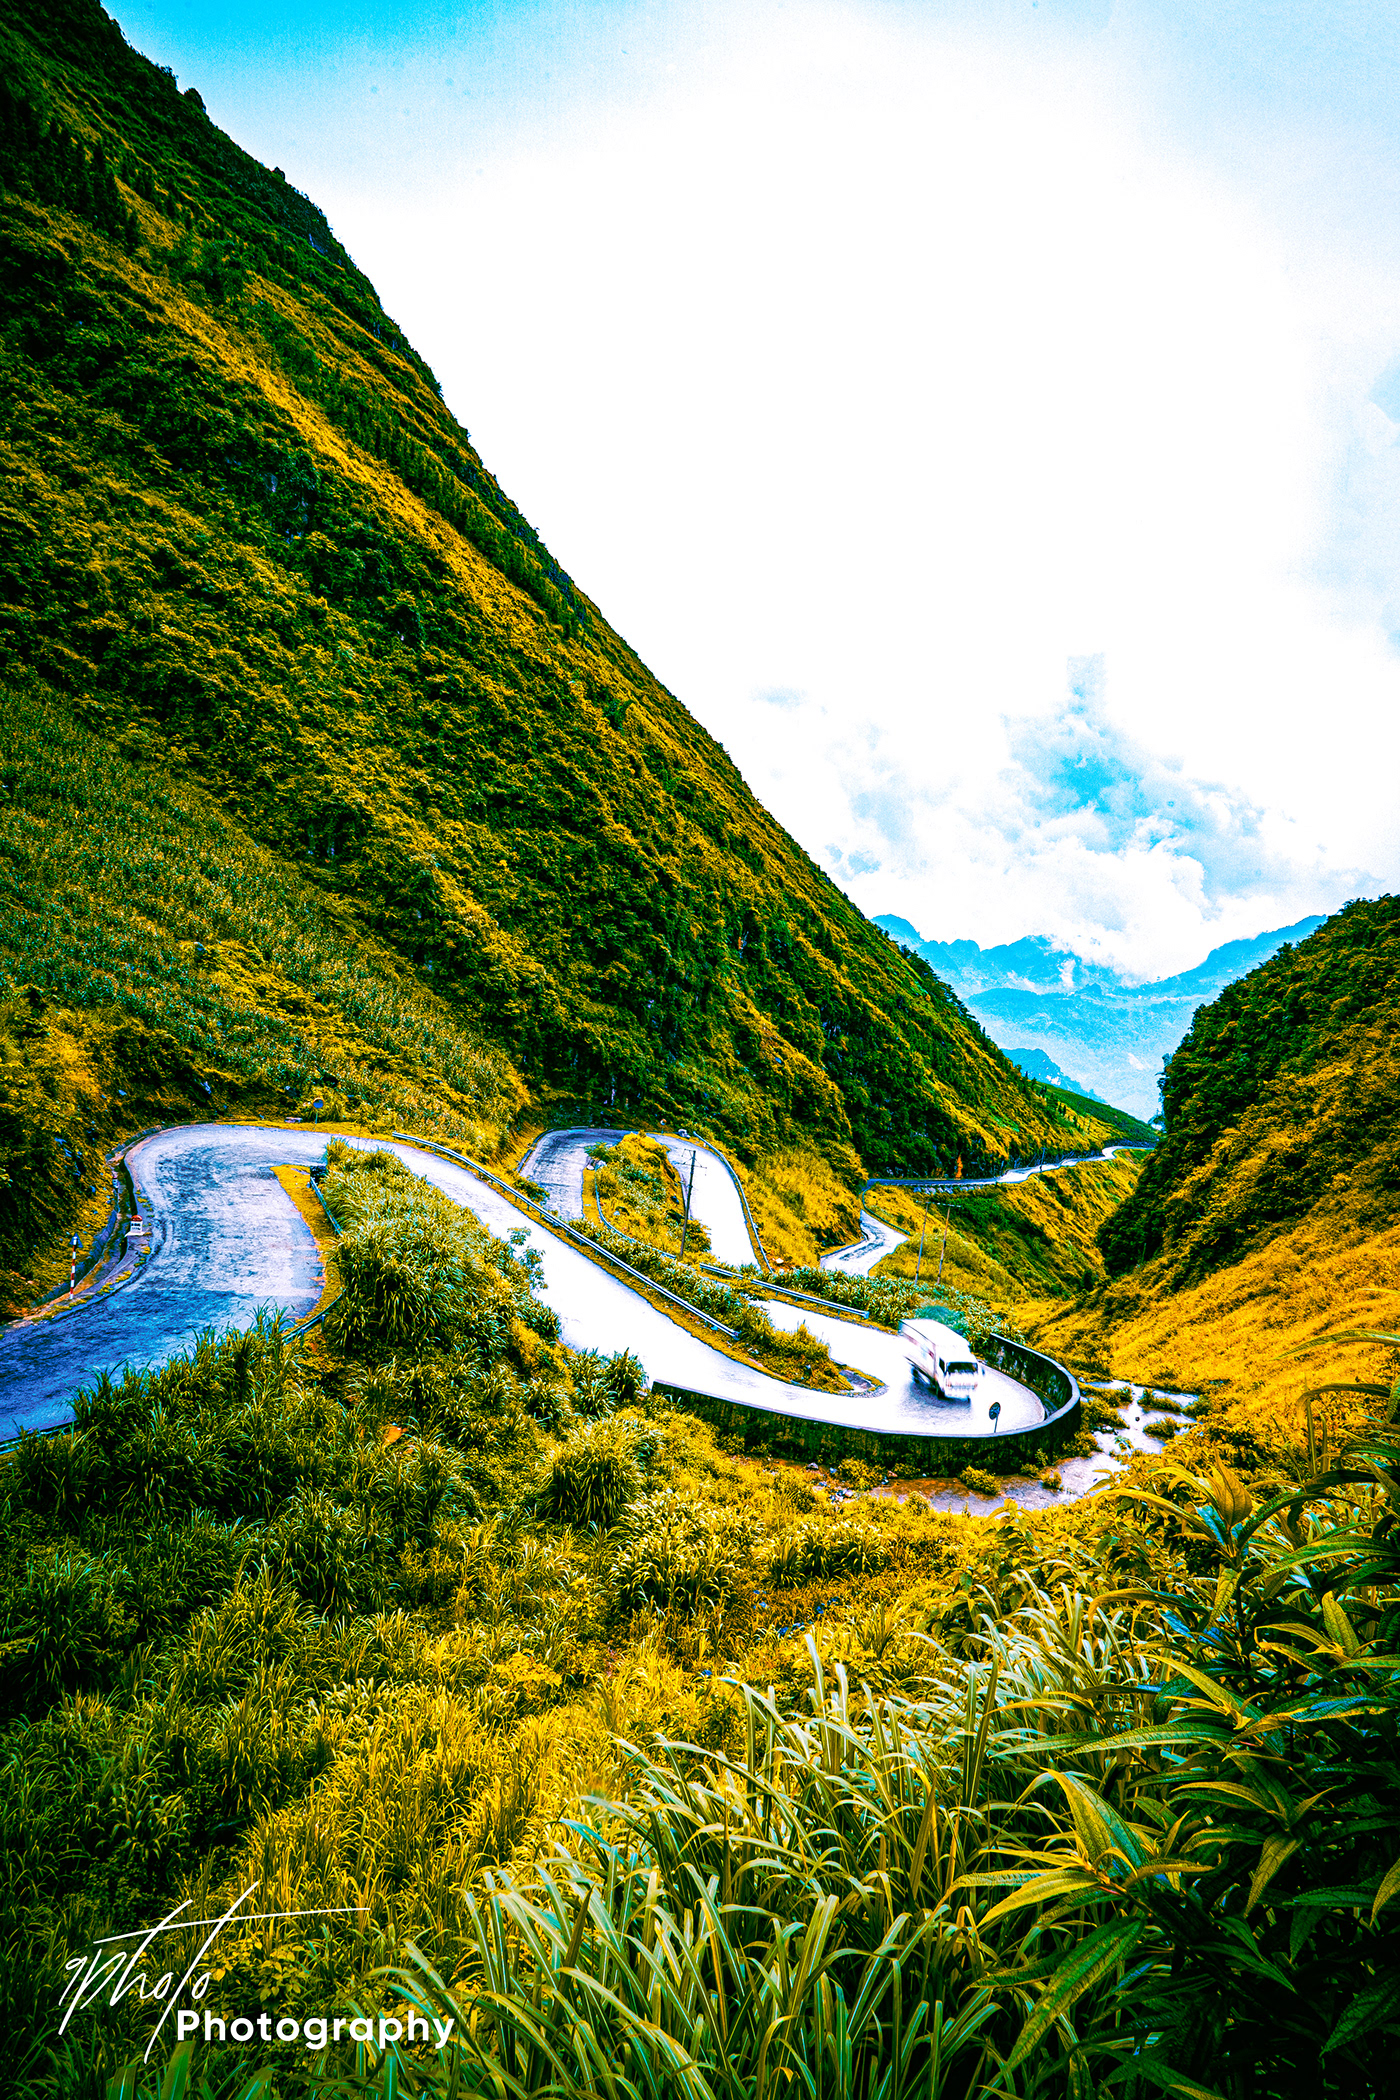 HaGiang Landscape Photography 